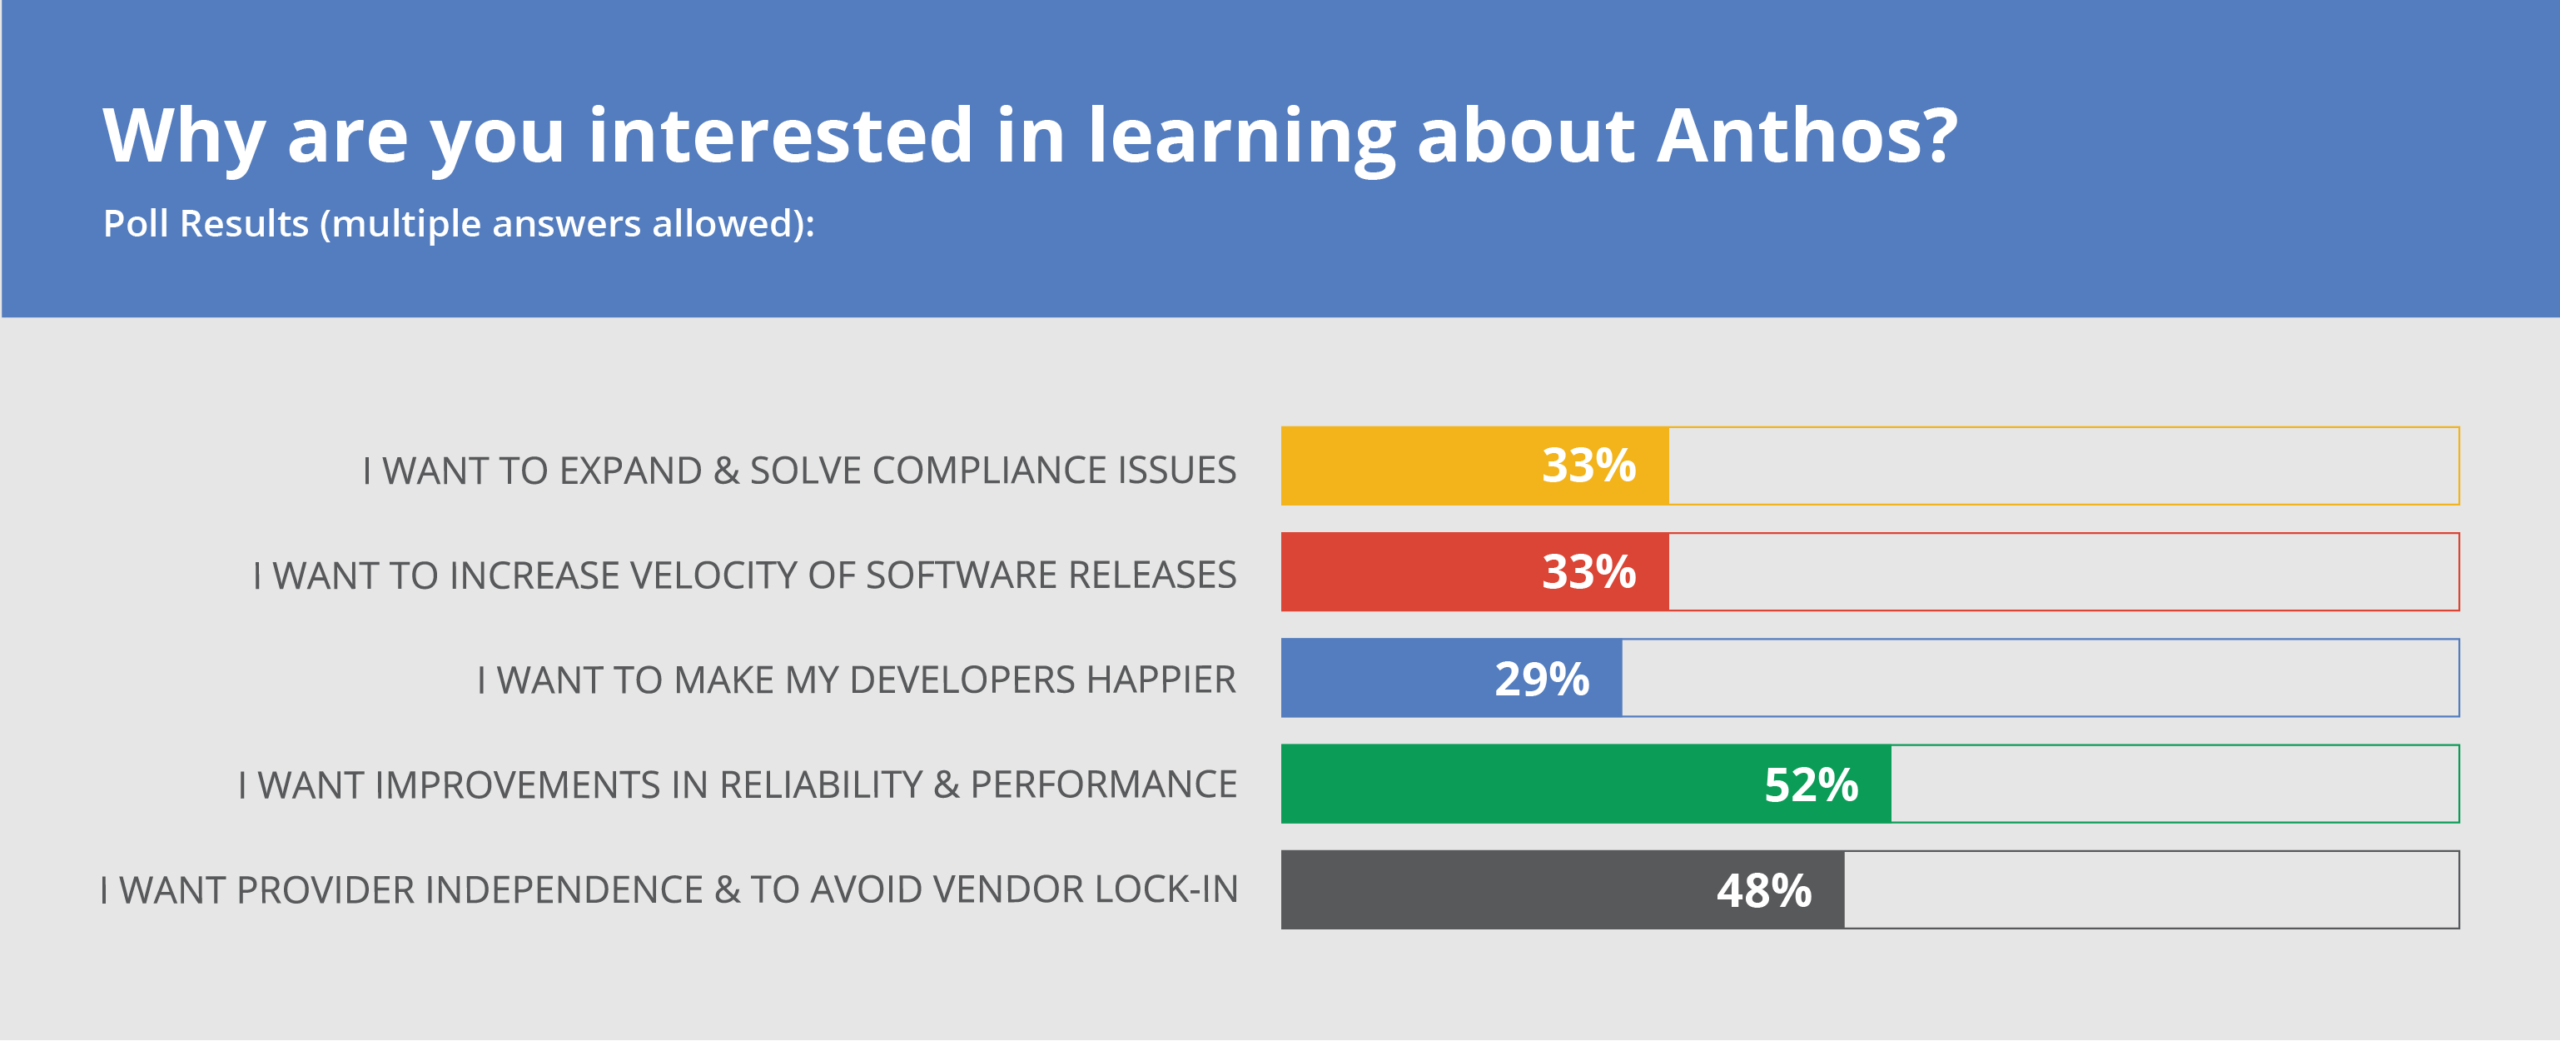 Stats about why people are interesting in learning about Anthos